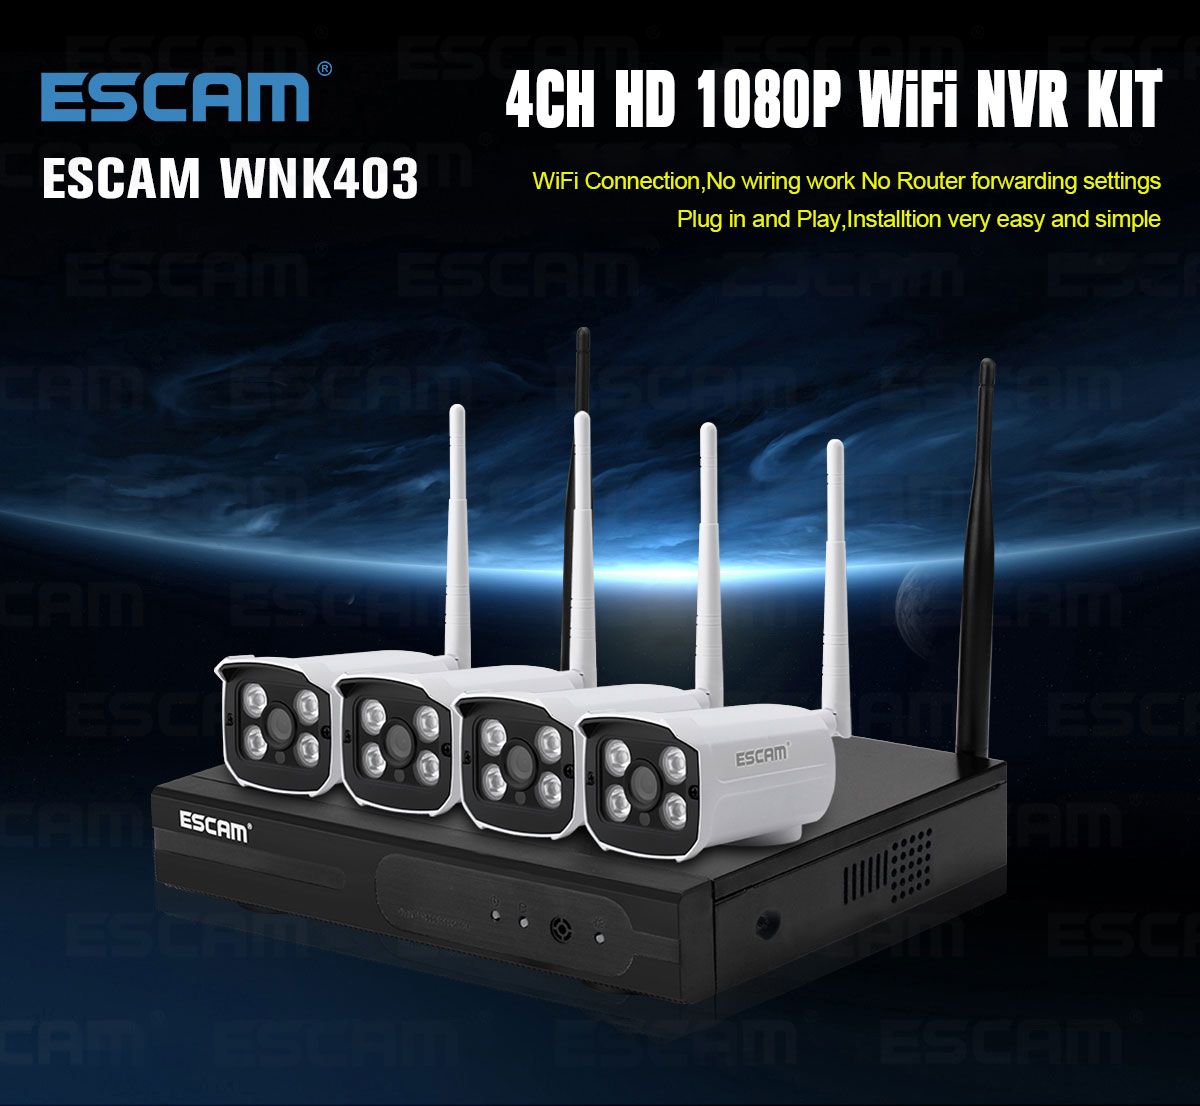 ESCAM-WNK403-4CH-WiFi-NVR-Kit-P2P-1080P-Access-Point-Outdoor-IR-Night-Vision-IP-Camera-System-1081790